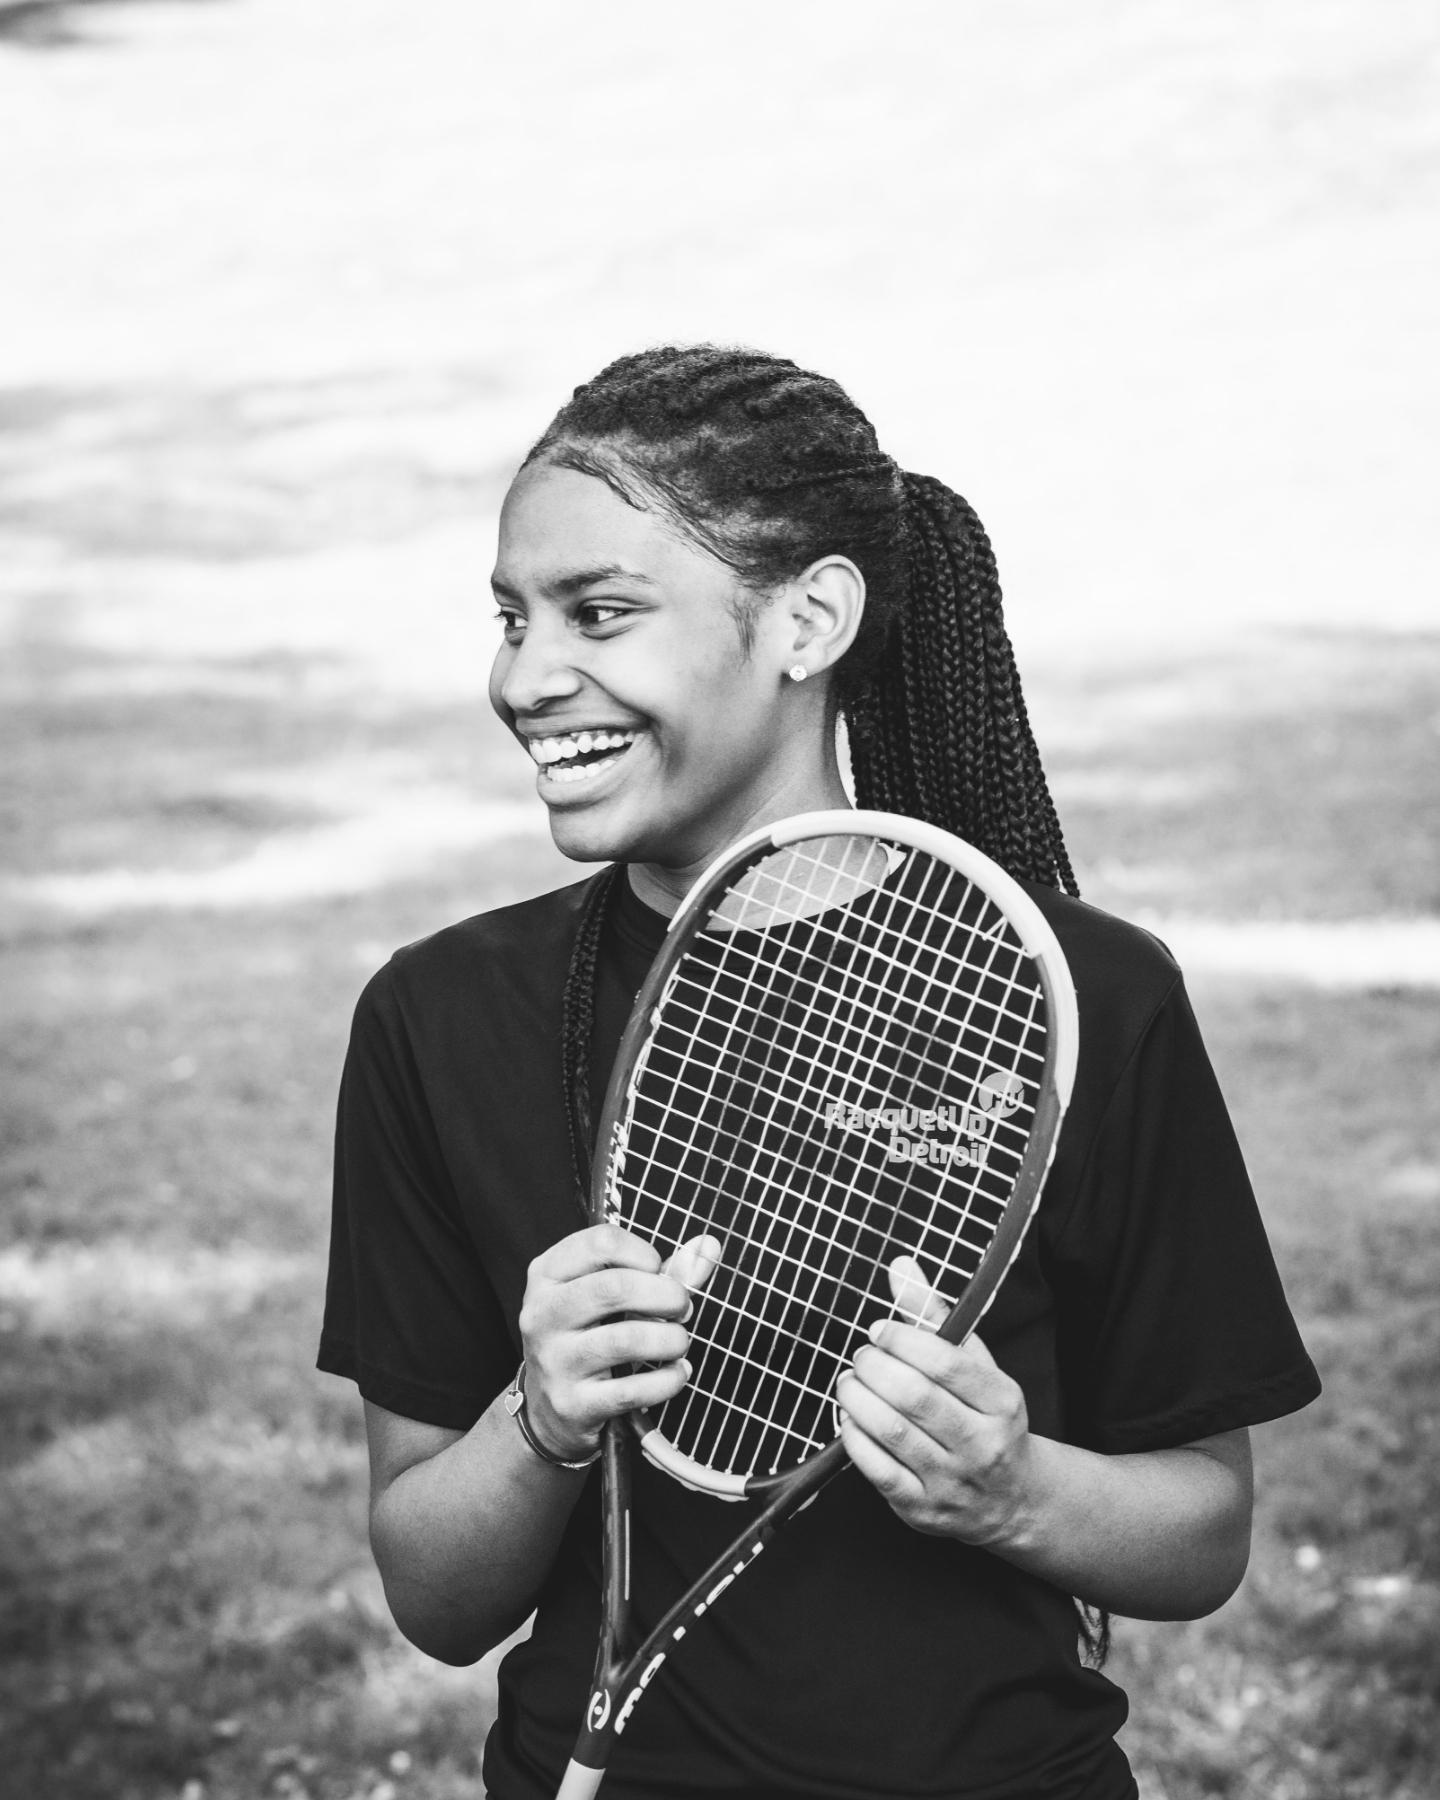 A young girl with a pony tail, holding a racquet.